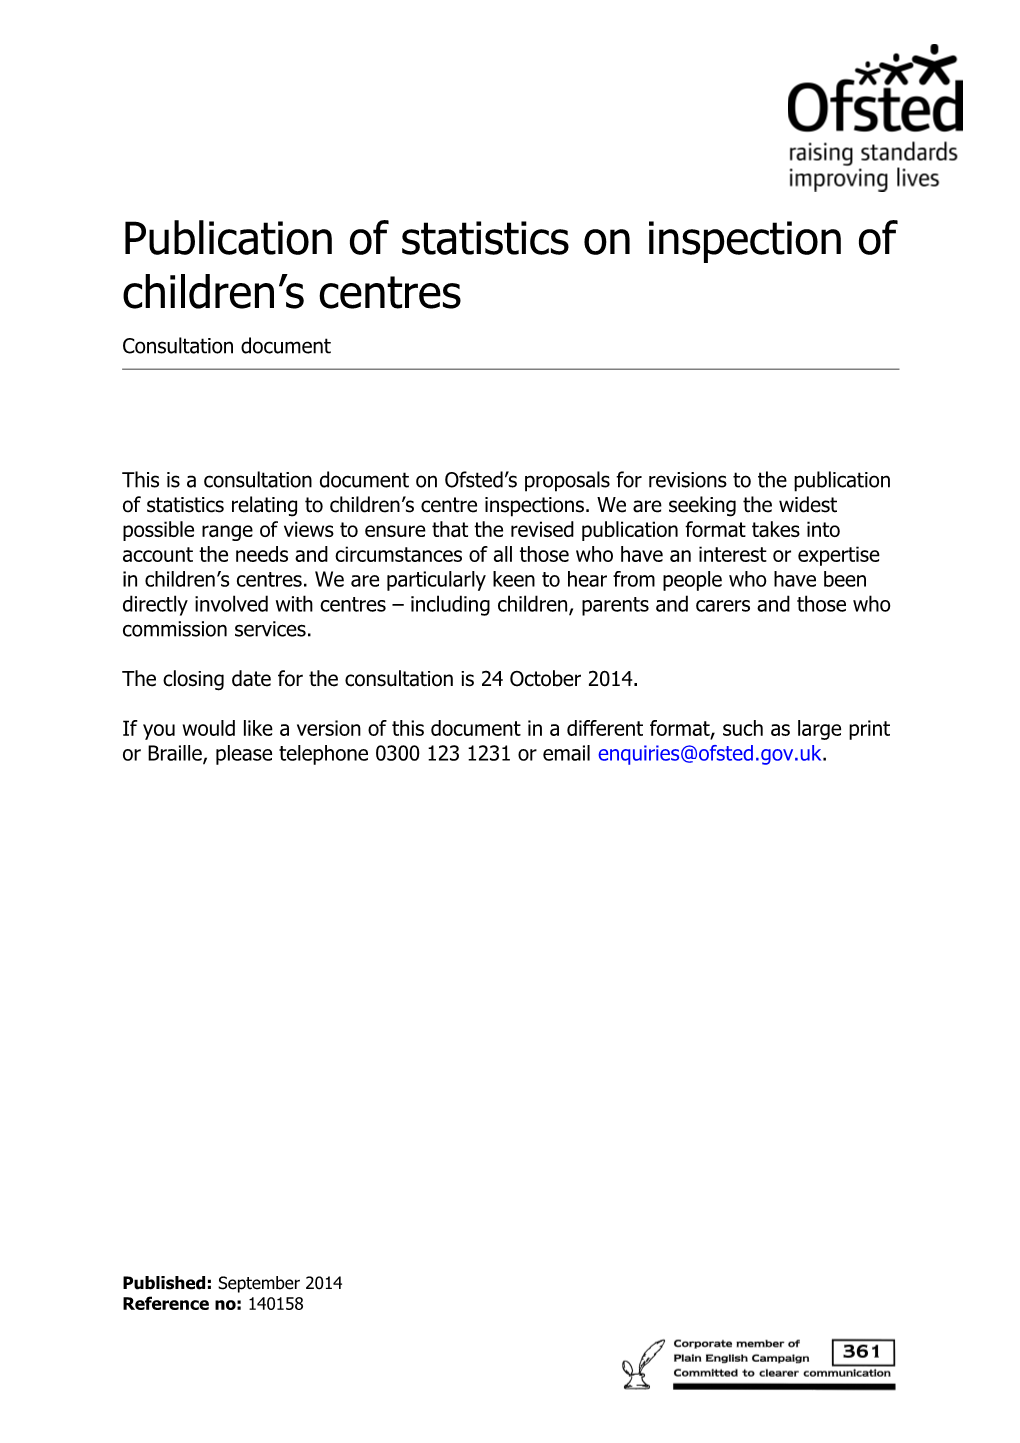 Publication of Statistics on Inspection of Children Scentres